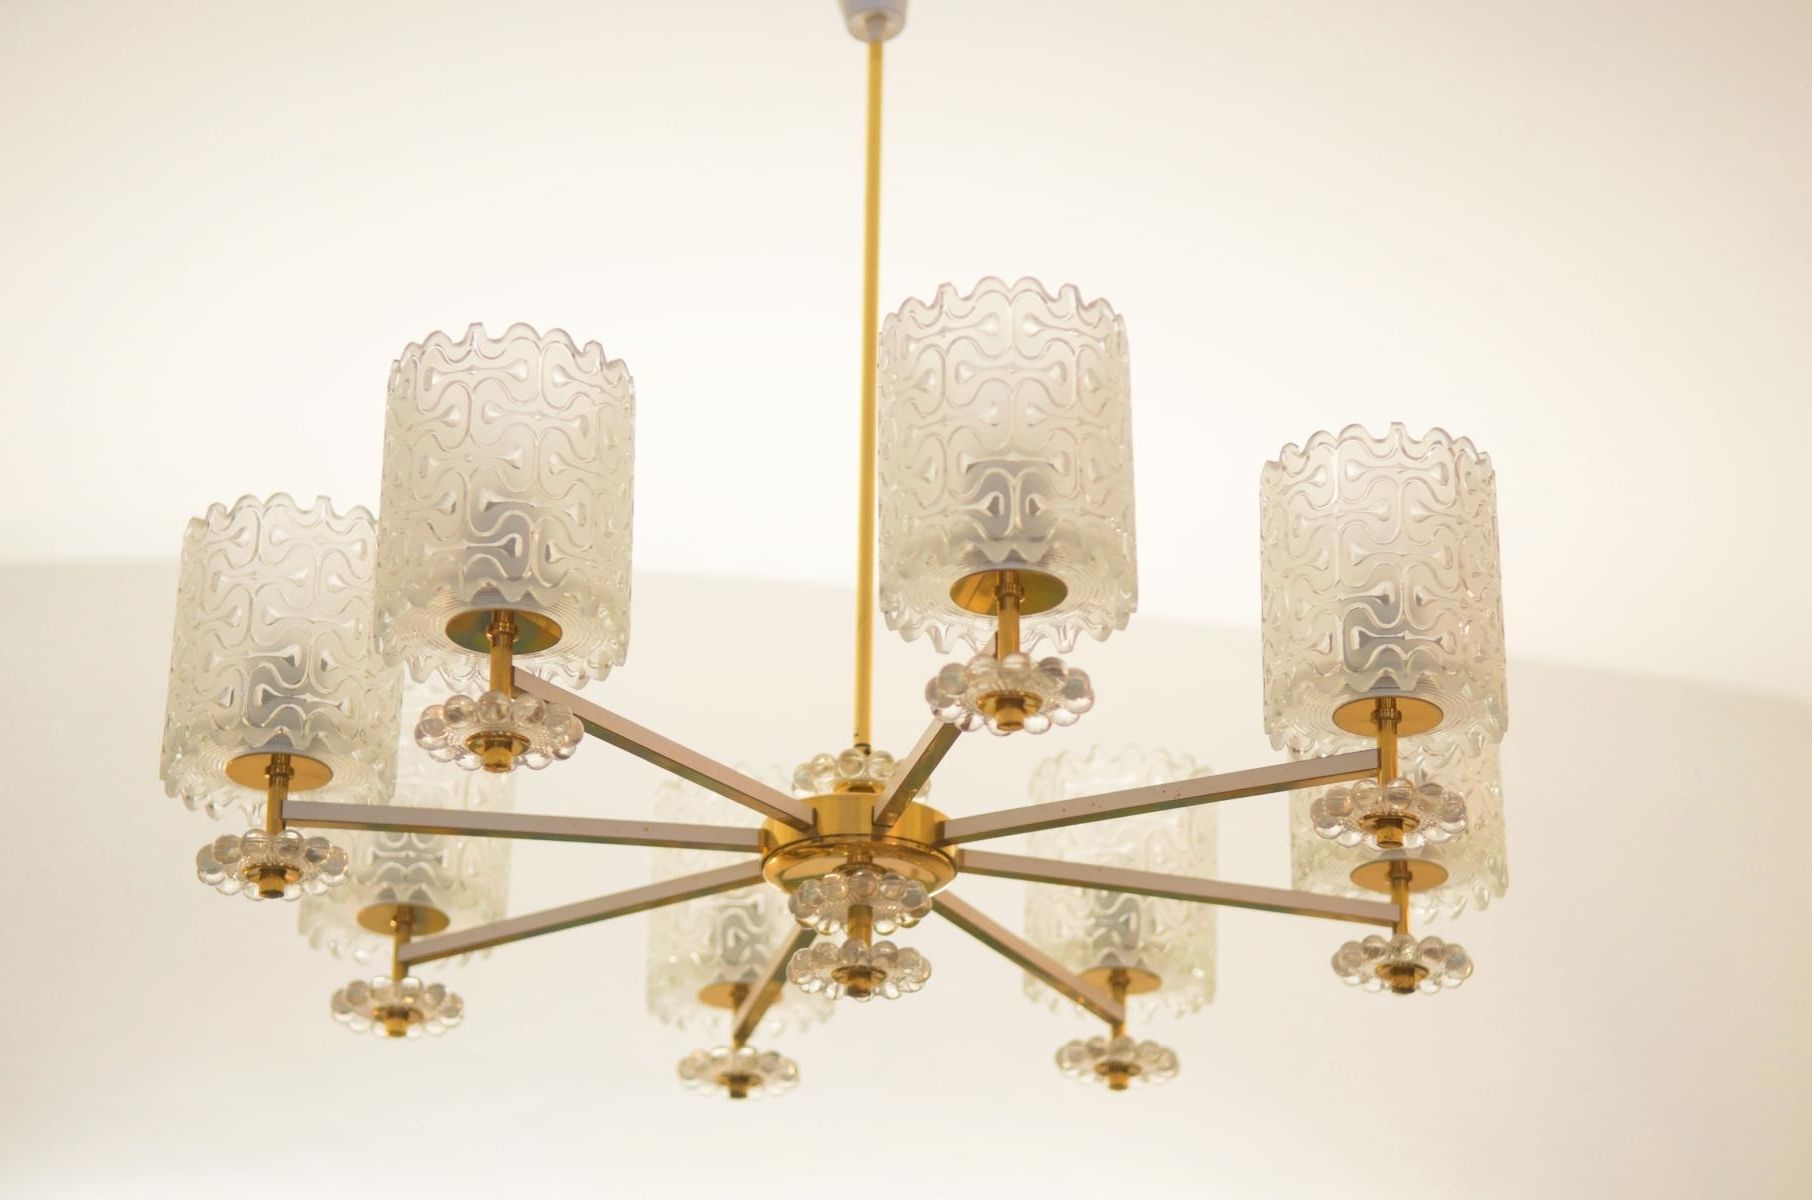 Popular Vintage Brass And Glass Chandelier From Austria, 1970s For Sale At Throughout Brass And Glass Chandelier (View 4 of 15)